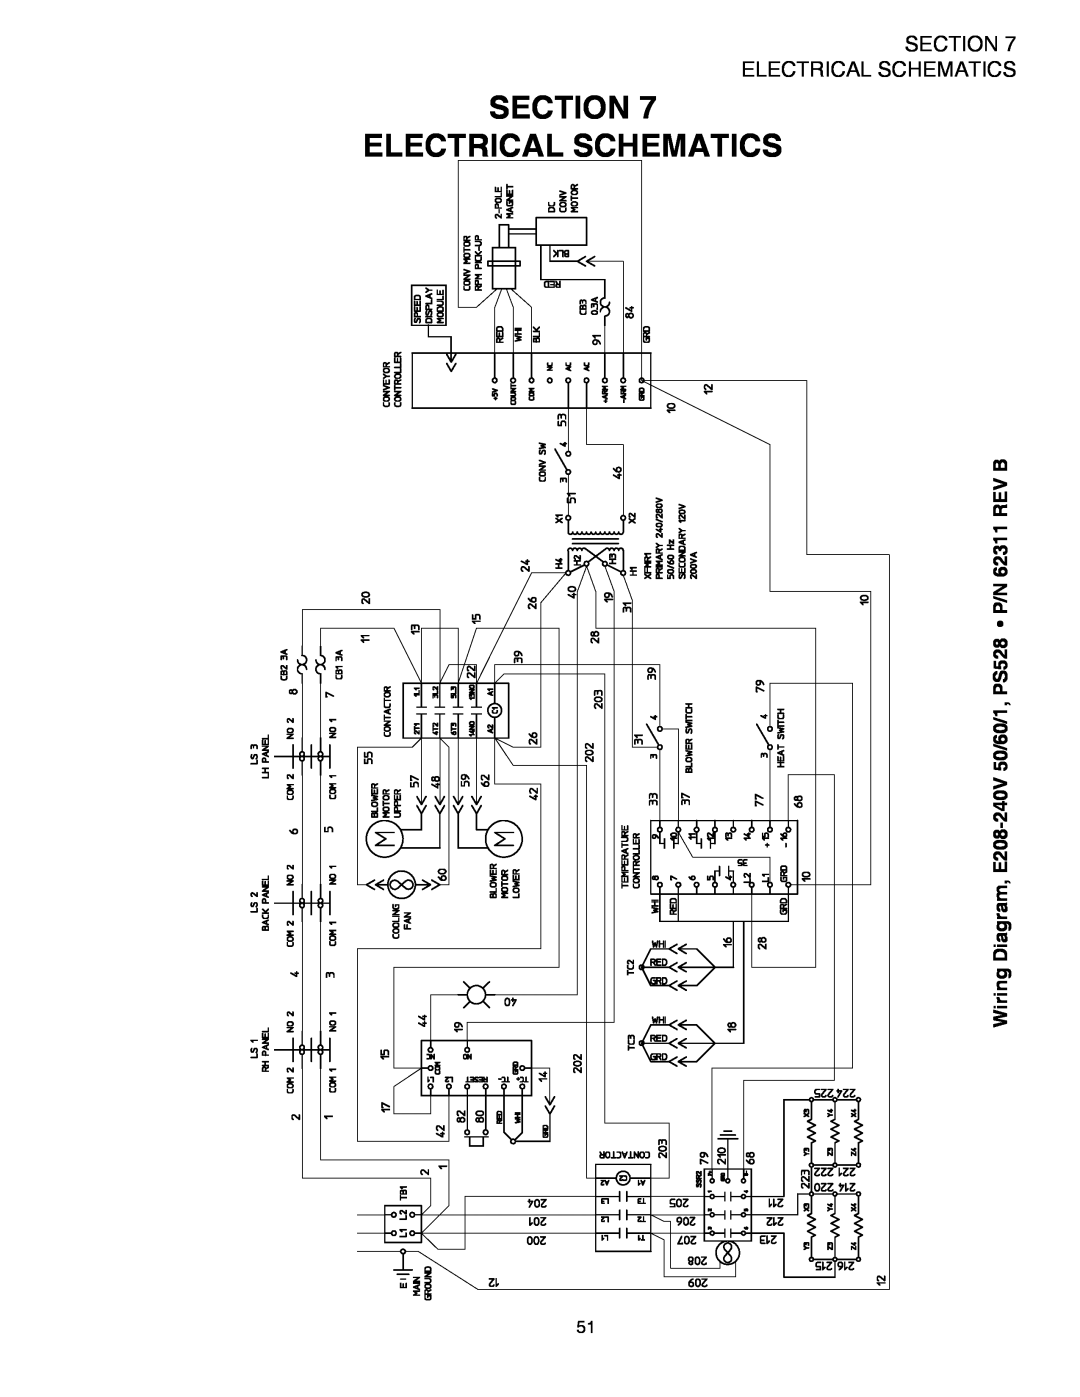 Middleby Marshall PS528 (Double) Section Electrical Schematics, Wiring Diagram, E208-240V 50/60/1, PS528 P/N 62311 REV B 